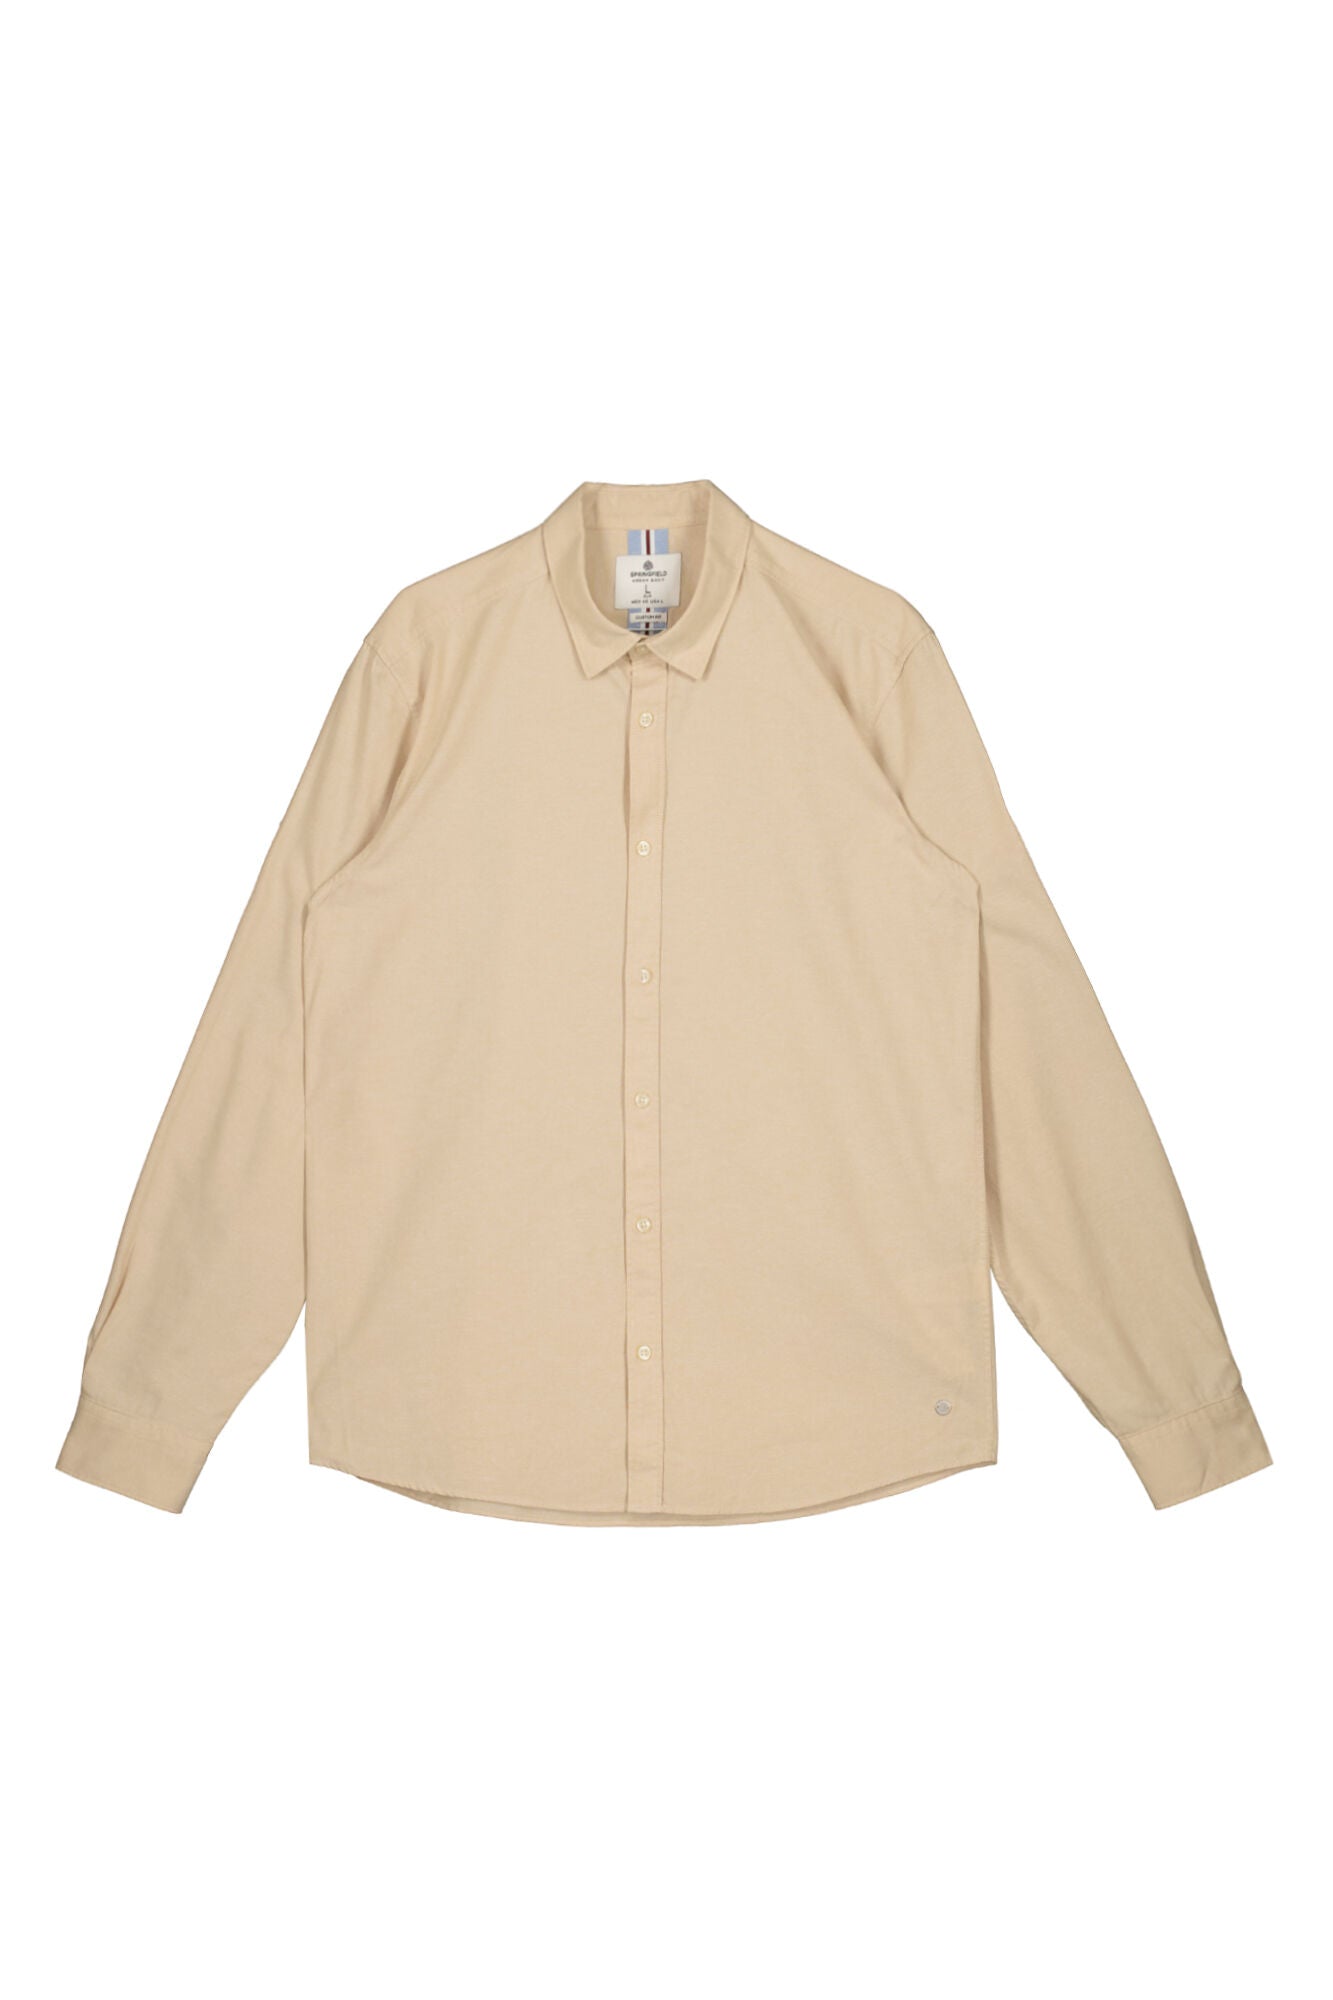 Pinpoint shirt with elbow patches